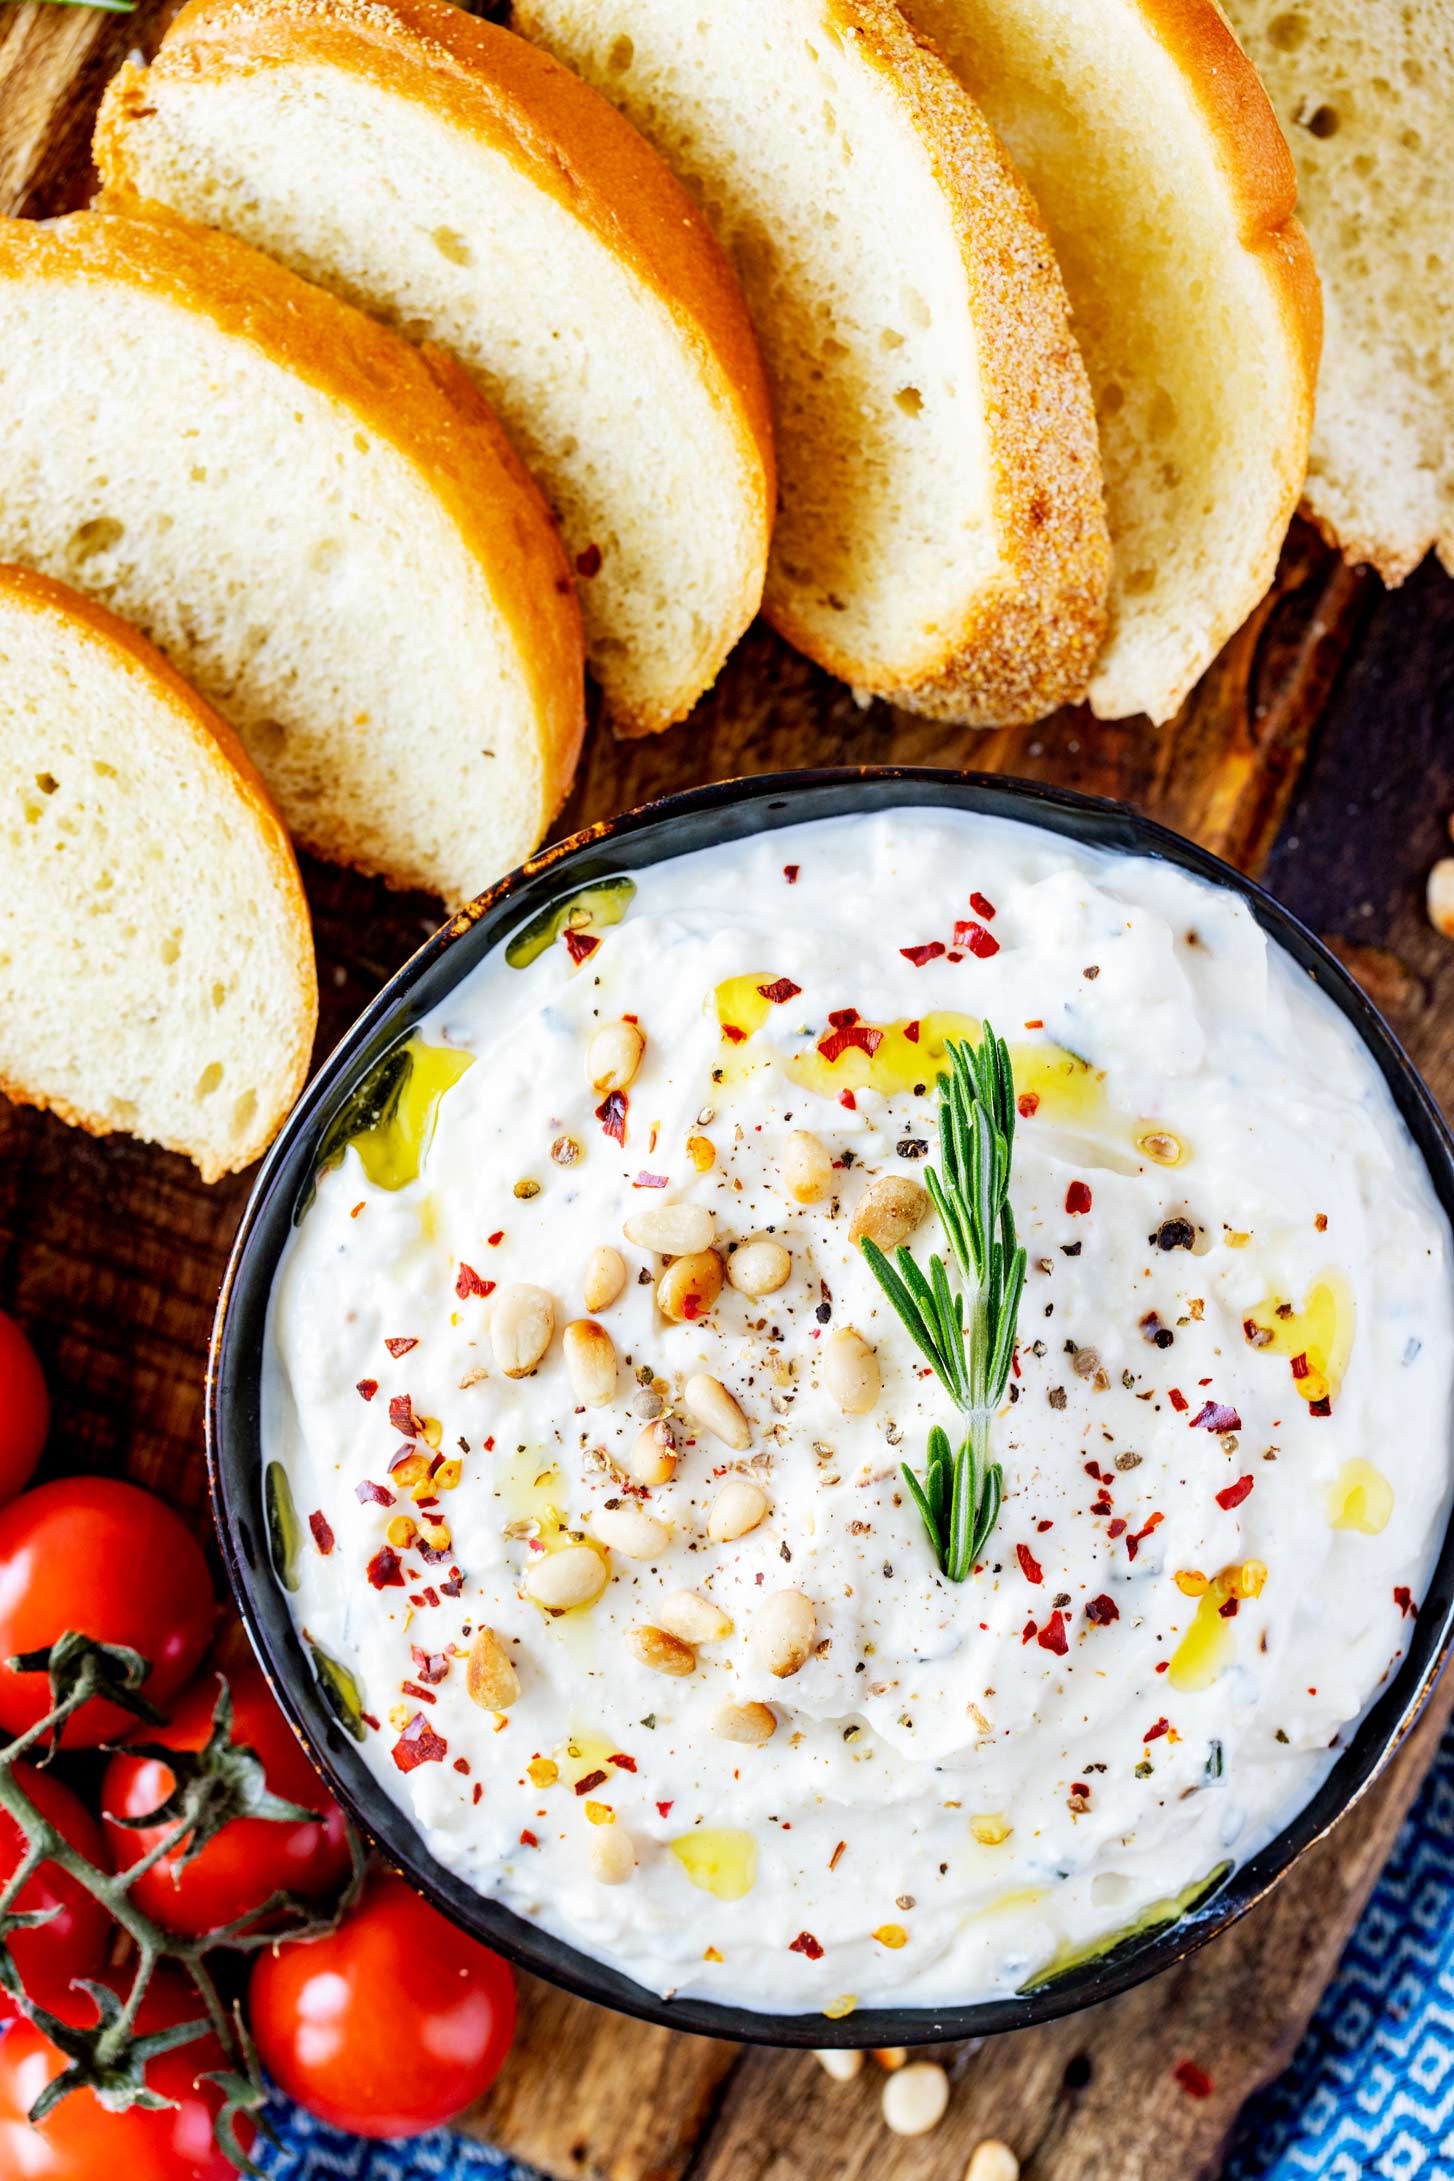 Overhead photo of a small bowl with whipped ricotta dip garnished with pine nuts and crushed red pepper flakes and surrounded by baguette slices.